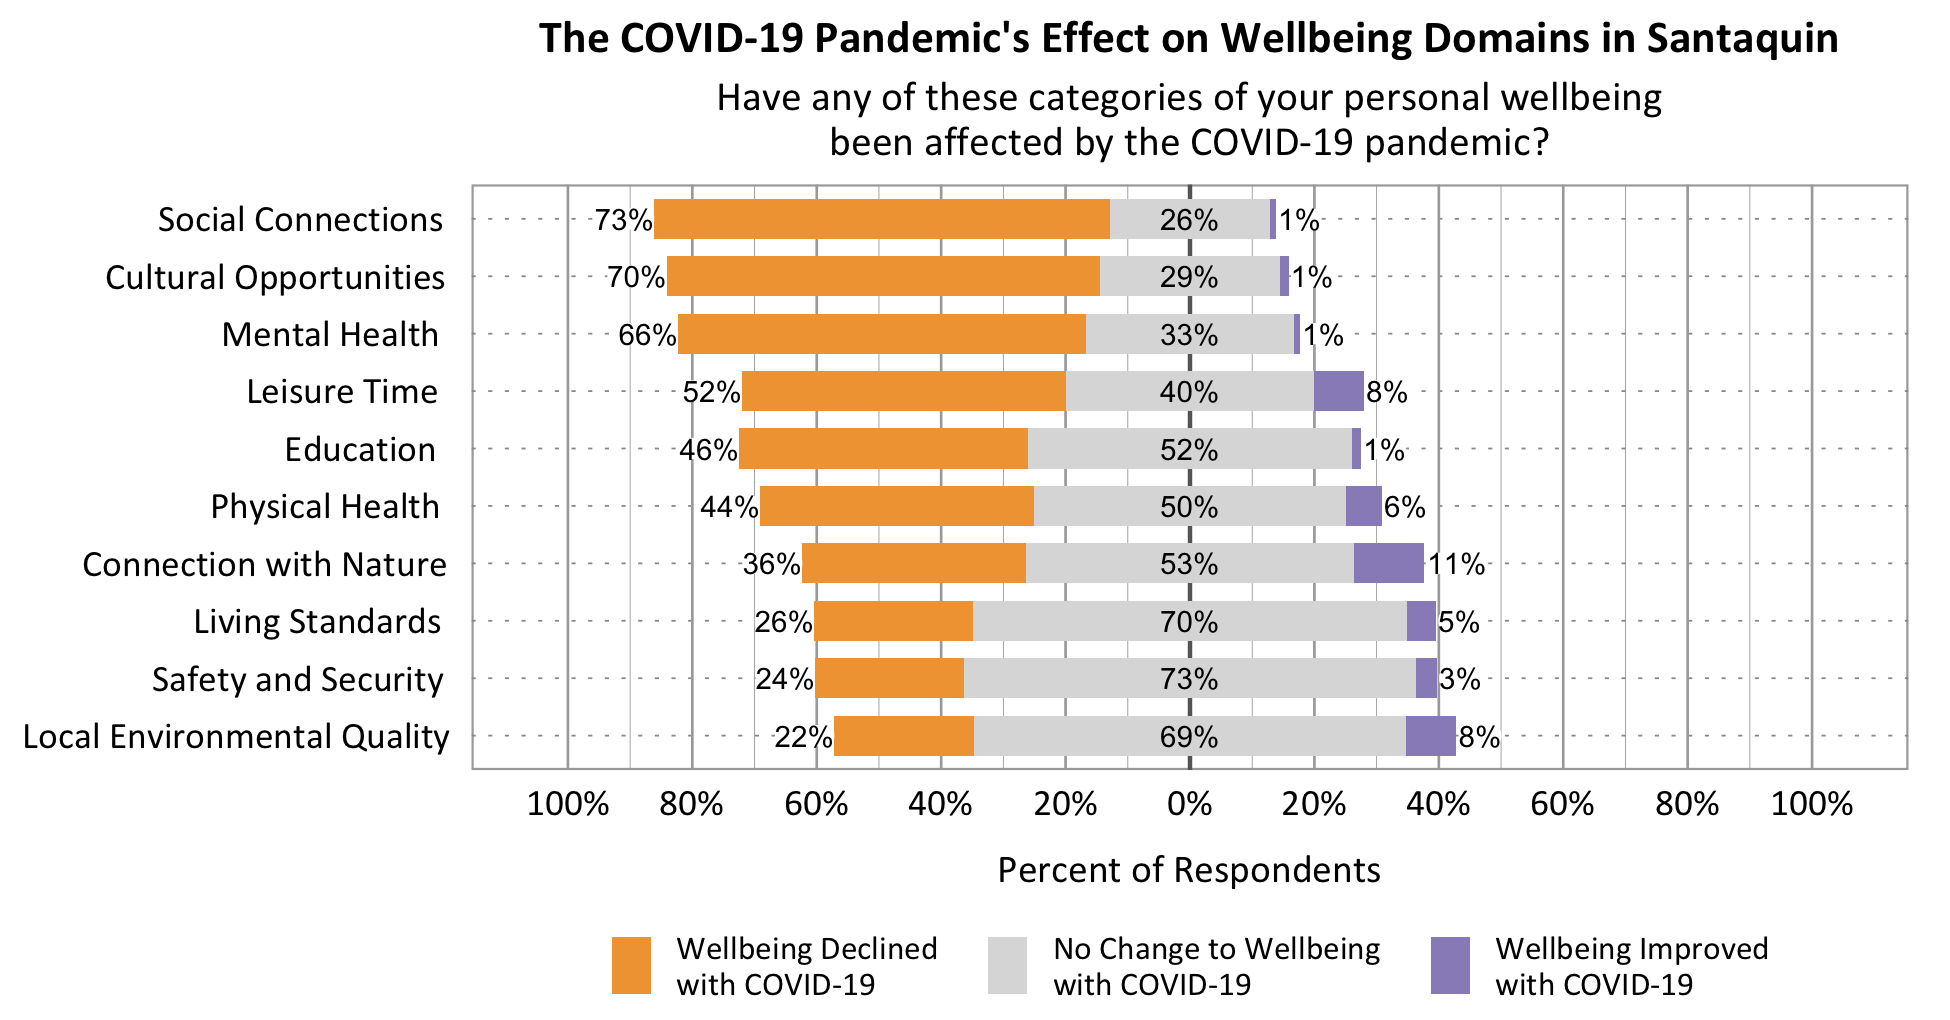 Likert Graph. Title: The COVID-19 Pandemic's effect on wellbeing domains in Sanaquin. Subtitle: Have any of these categories of your personal wellbeing been affected by the COVID-19 pandemic? Data – Category: Social Connections- 73% of respondents rated wellbeing declined with COVID-19, 26% of respondents rated no change to wellbeing with COVID-19, 1% of respondents rated wellbeing improved with COVID-19; Category: Cultural Opportunities- 70% of respondents rated wellbeing declined with COVID-19, 29% of respondents rated no change to wellbeing with COVID-19, 1% of respondents rated wellbeing improved with COVID-19; Category: Mental Health- 66% of respondents rated wellbeing declined with COVID-19, 33% of respondents rated no change to wellbeing with COVID-19, 1% of respondents rated wellbeing improved with COVID-19; Category: Leisure Time- 52% of respondents rated wellbeing declined with COVID-19, 40% of respondents rated no change to wellbeing with COVID-19, 8% of respondents rated wellbeing improved with COVID-19; Category: Physical Health - 44% of respondents rated wellbeing declined with COVID-19, 50% of respondents rated no change to wellbeing with COVID-19, 6% of respondents rated wellbeing improved with COVID-19; Category: Connection with Nature- 36% of respondents rated wellbeing declined with COVID-19, 53% of respondents rated no change to wellbeing with COVID-19, 11% of respondents rated wellbeing improved with COVID-19; Category: Education-  46% of respondents rated wellbeing declined with COVID-19, 52% of respondents rated no change to wellbeing with COVID-19, 1% of respondents rated wellbeing improved with COVID-19; Category: Living Standards- 26% of respondents rated wellbeing declined with COVID-19, 70% of respondents rated no change to wellbeing with COVID-19, 5% of respondents rated wellbeing improved with COVID-19; Category:  Local Environmental Quality- 22% of respondents rated wellbeing declined with COVID-19, 69% of respondents rated no change to wellbeing with COVID-19, 8% of respondents rated wellbeing improved with COVID-19; Category: Safety and Security- 24% of respondents rated wellbeing declined with COVID-19, 73% of respondents rated no change to wellbeing with COVID-19, 3% of respondents rated wellbeing improved with COVID-19.